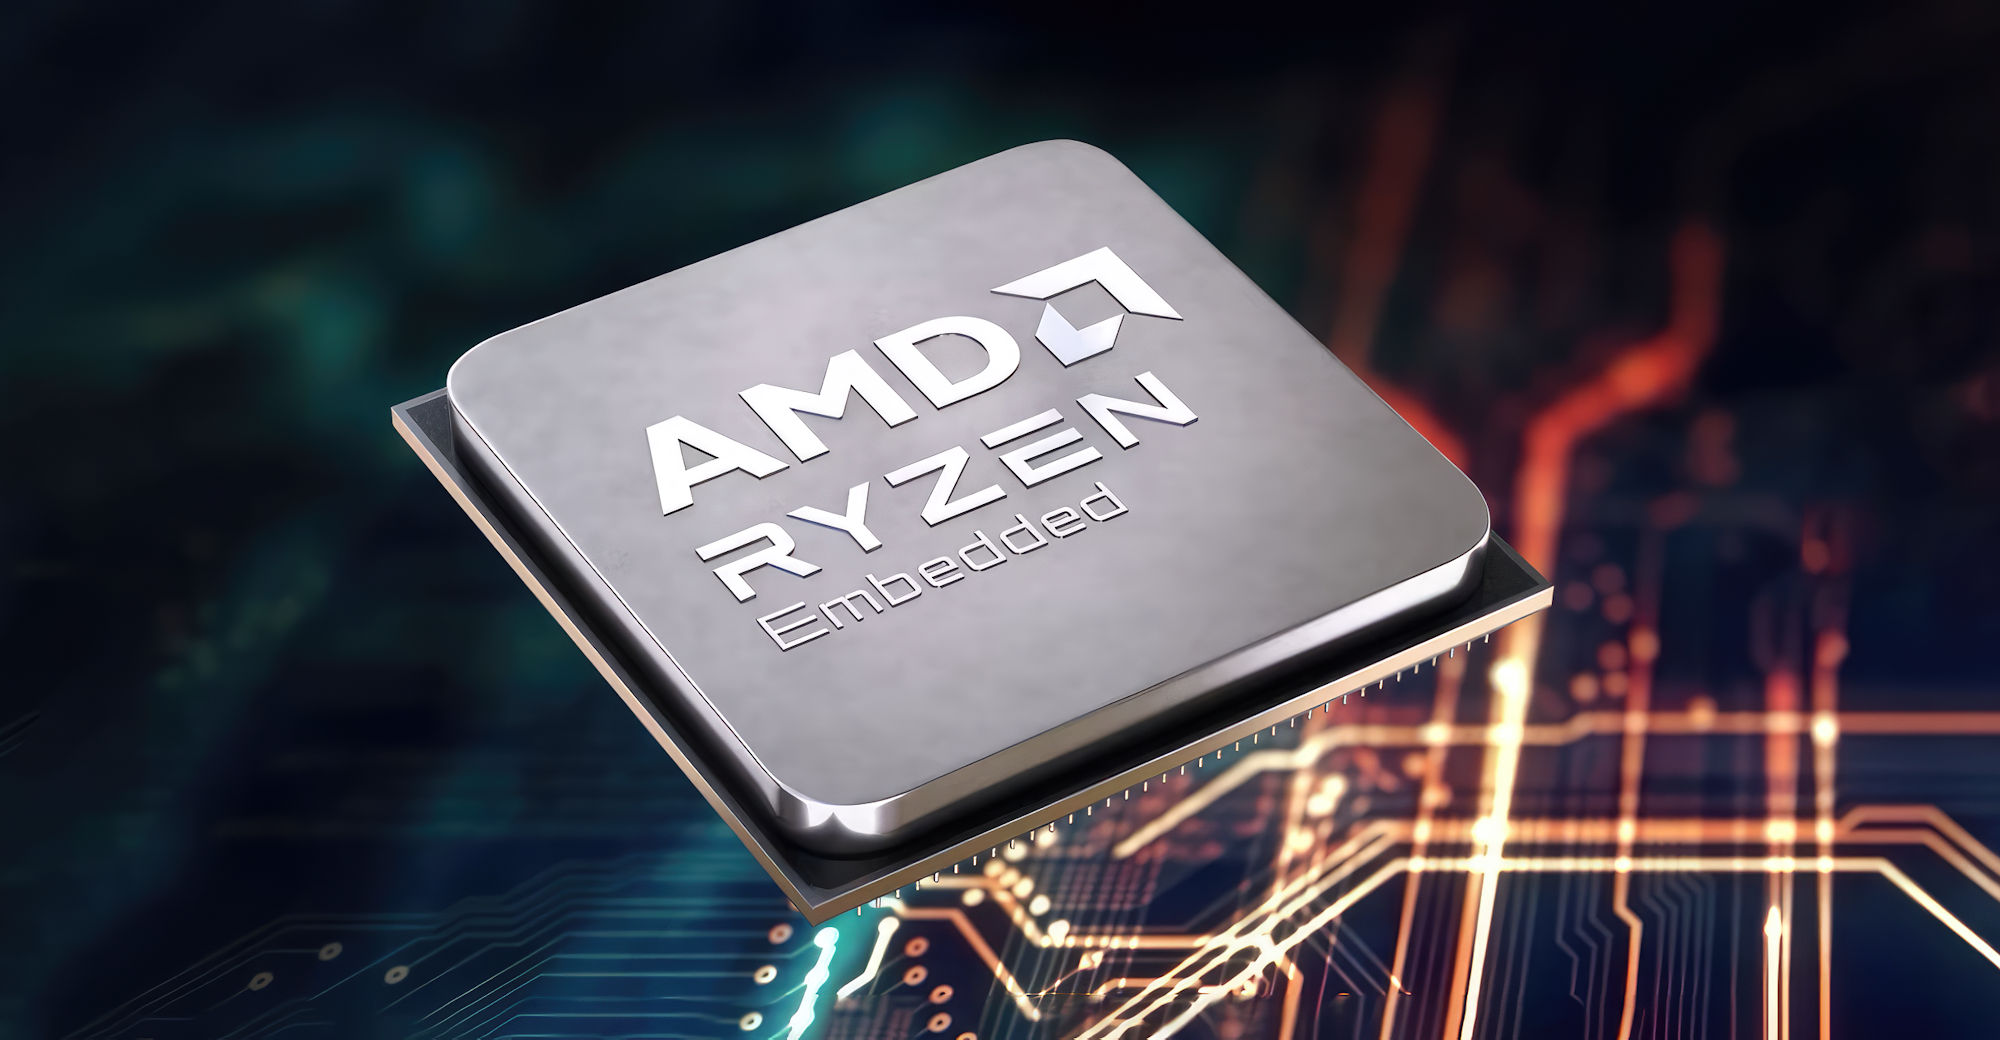 AMD launches Ryzen Embedded 5000 series with up to 16 Zen3 cores ...